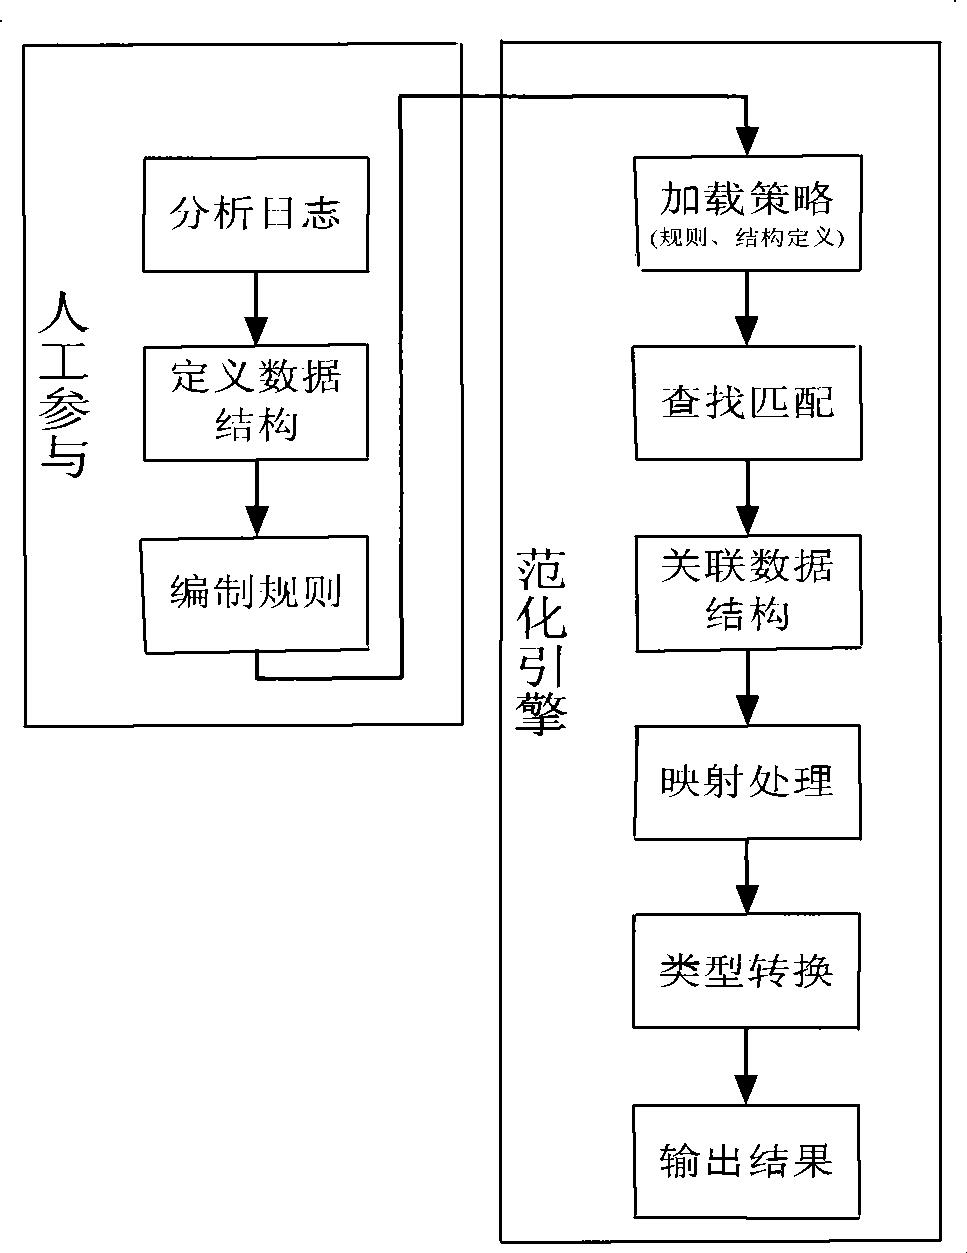 Security information management system and method based on general normalized labeling language